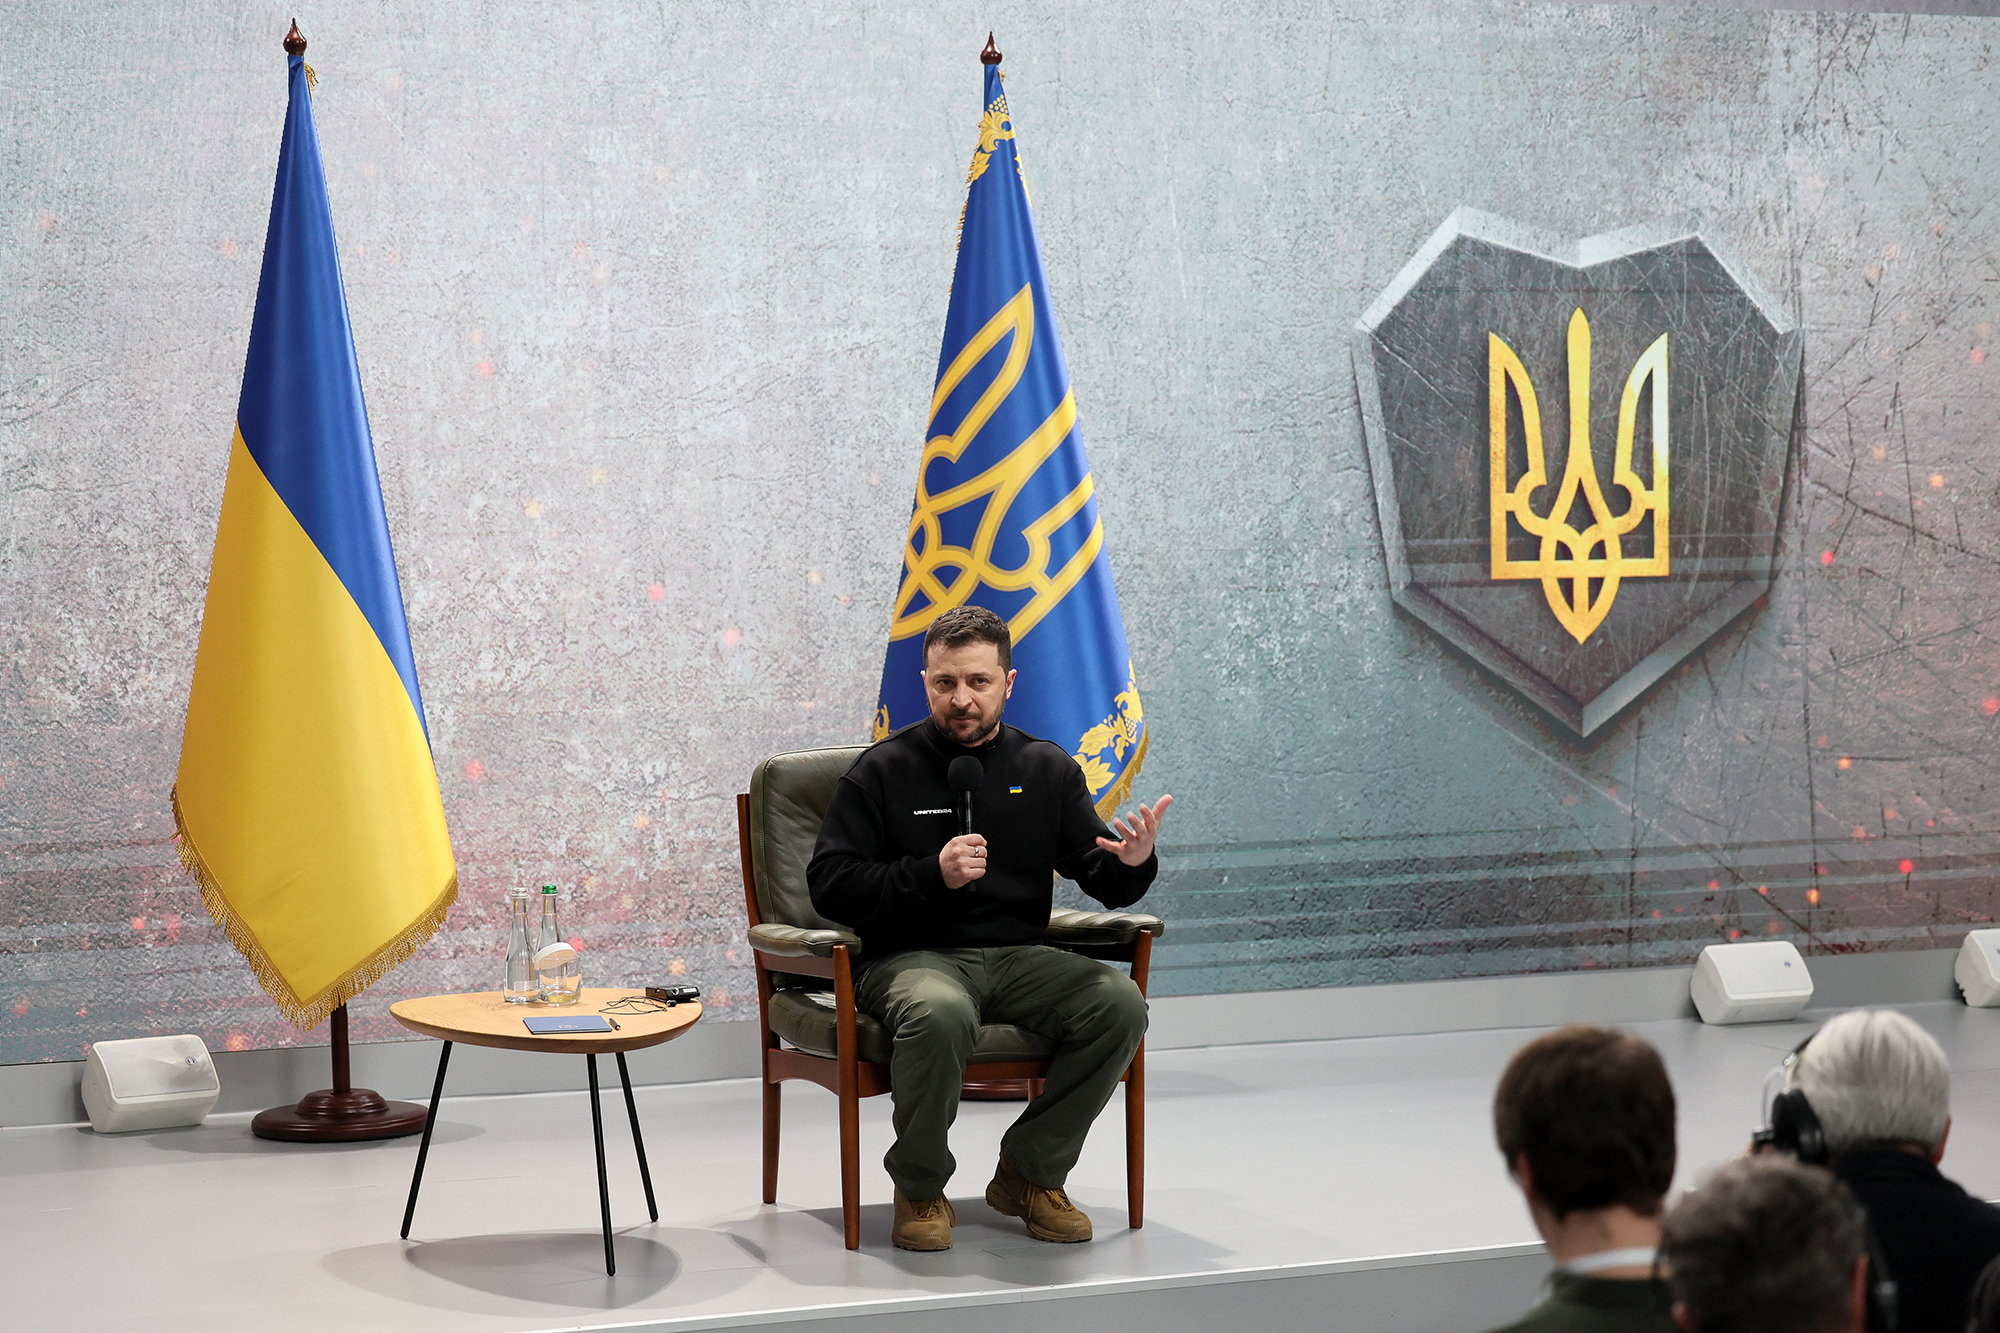 Ukraine's President Volodymyr Zelensky attends a news conference on the first anniversary of Russian invasion of Ukraine in Kyiv, Ukraine, on February 24.